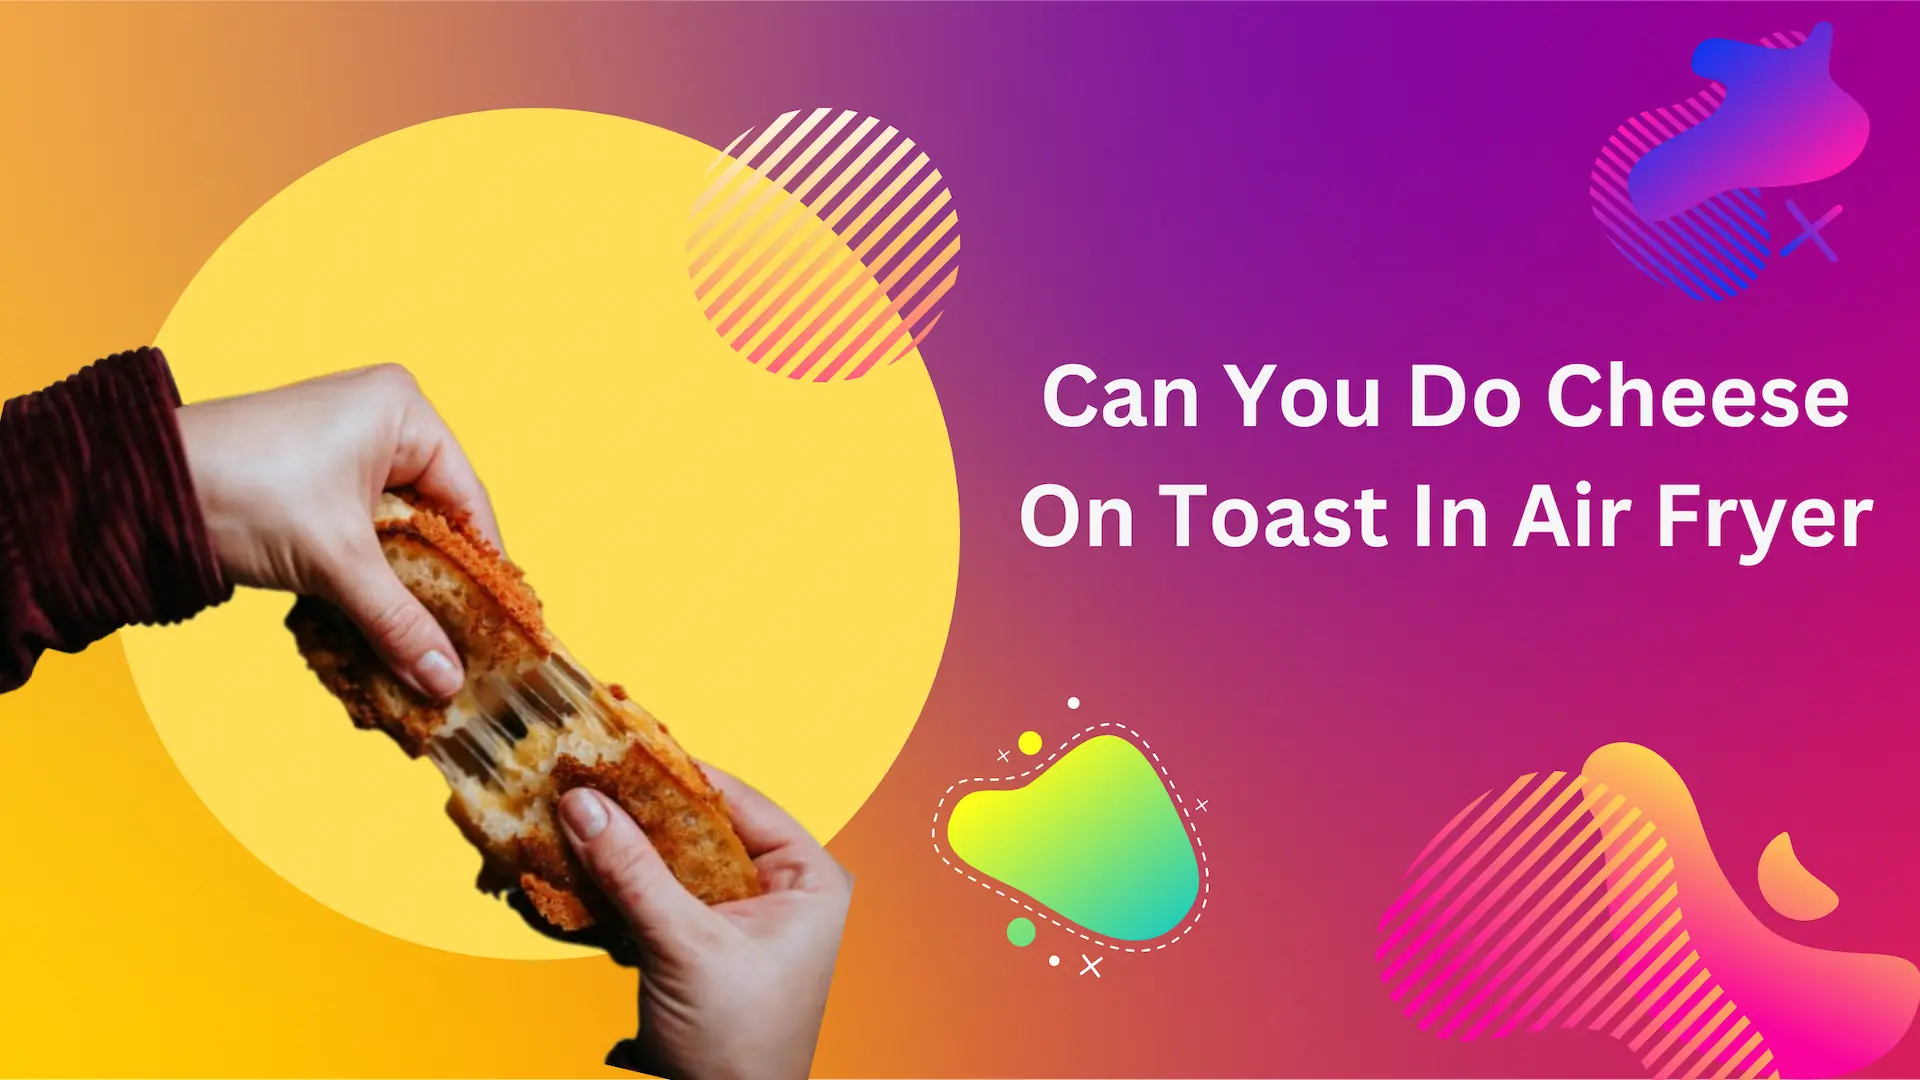 Can You Do Cheese On Toast In Air Fryer